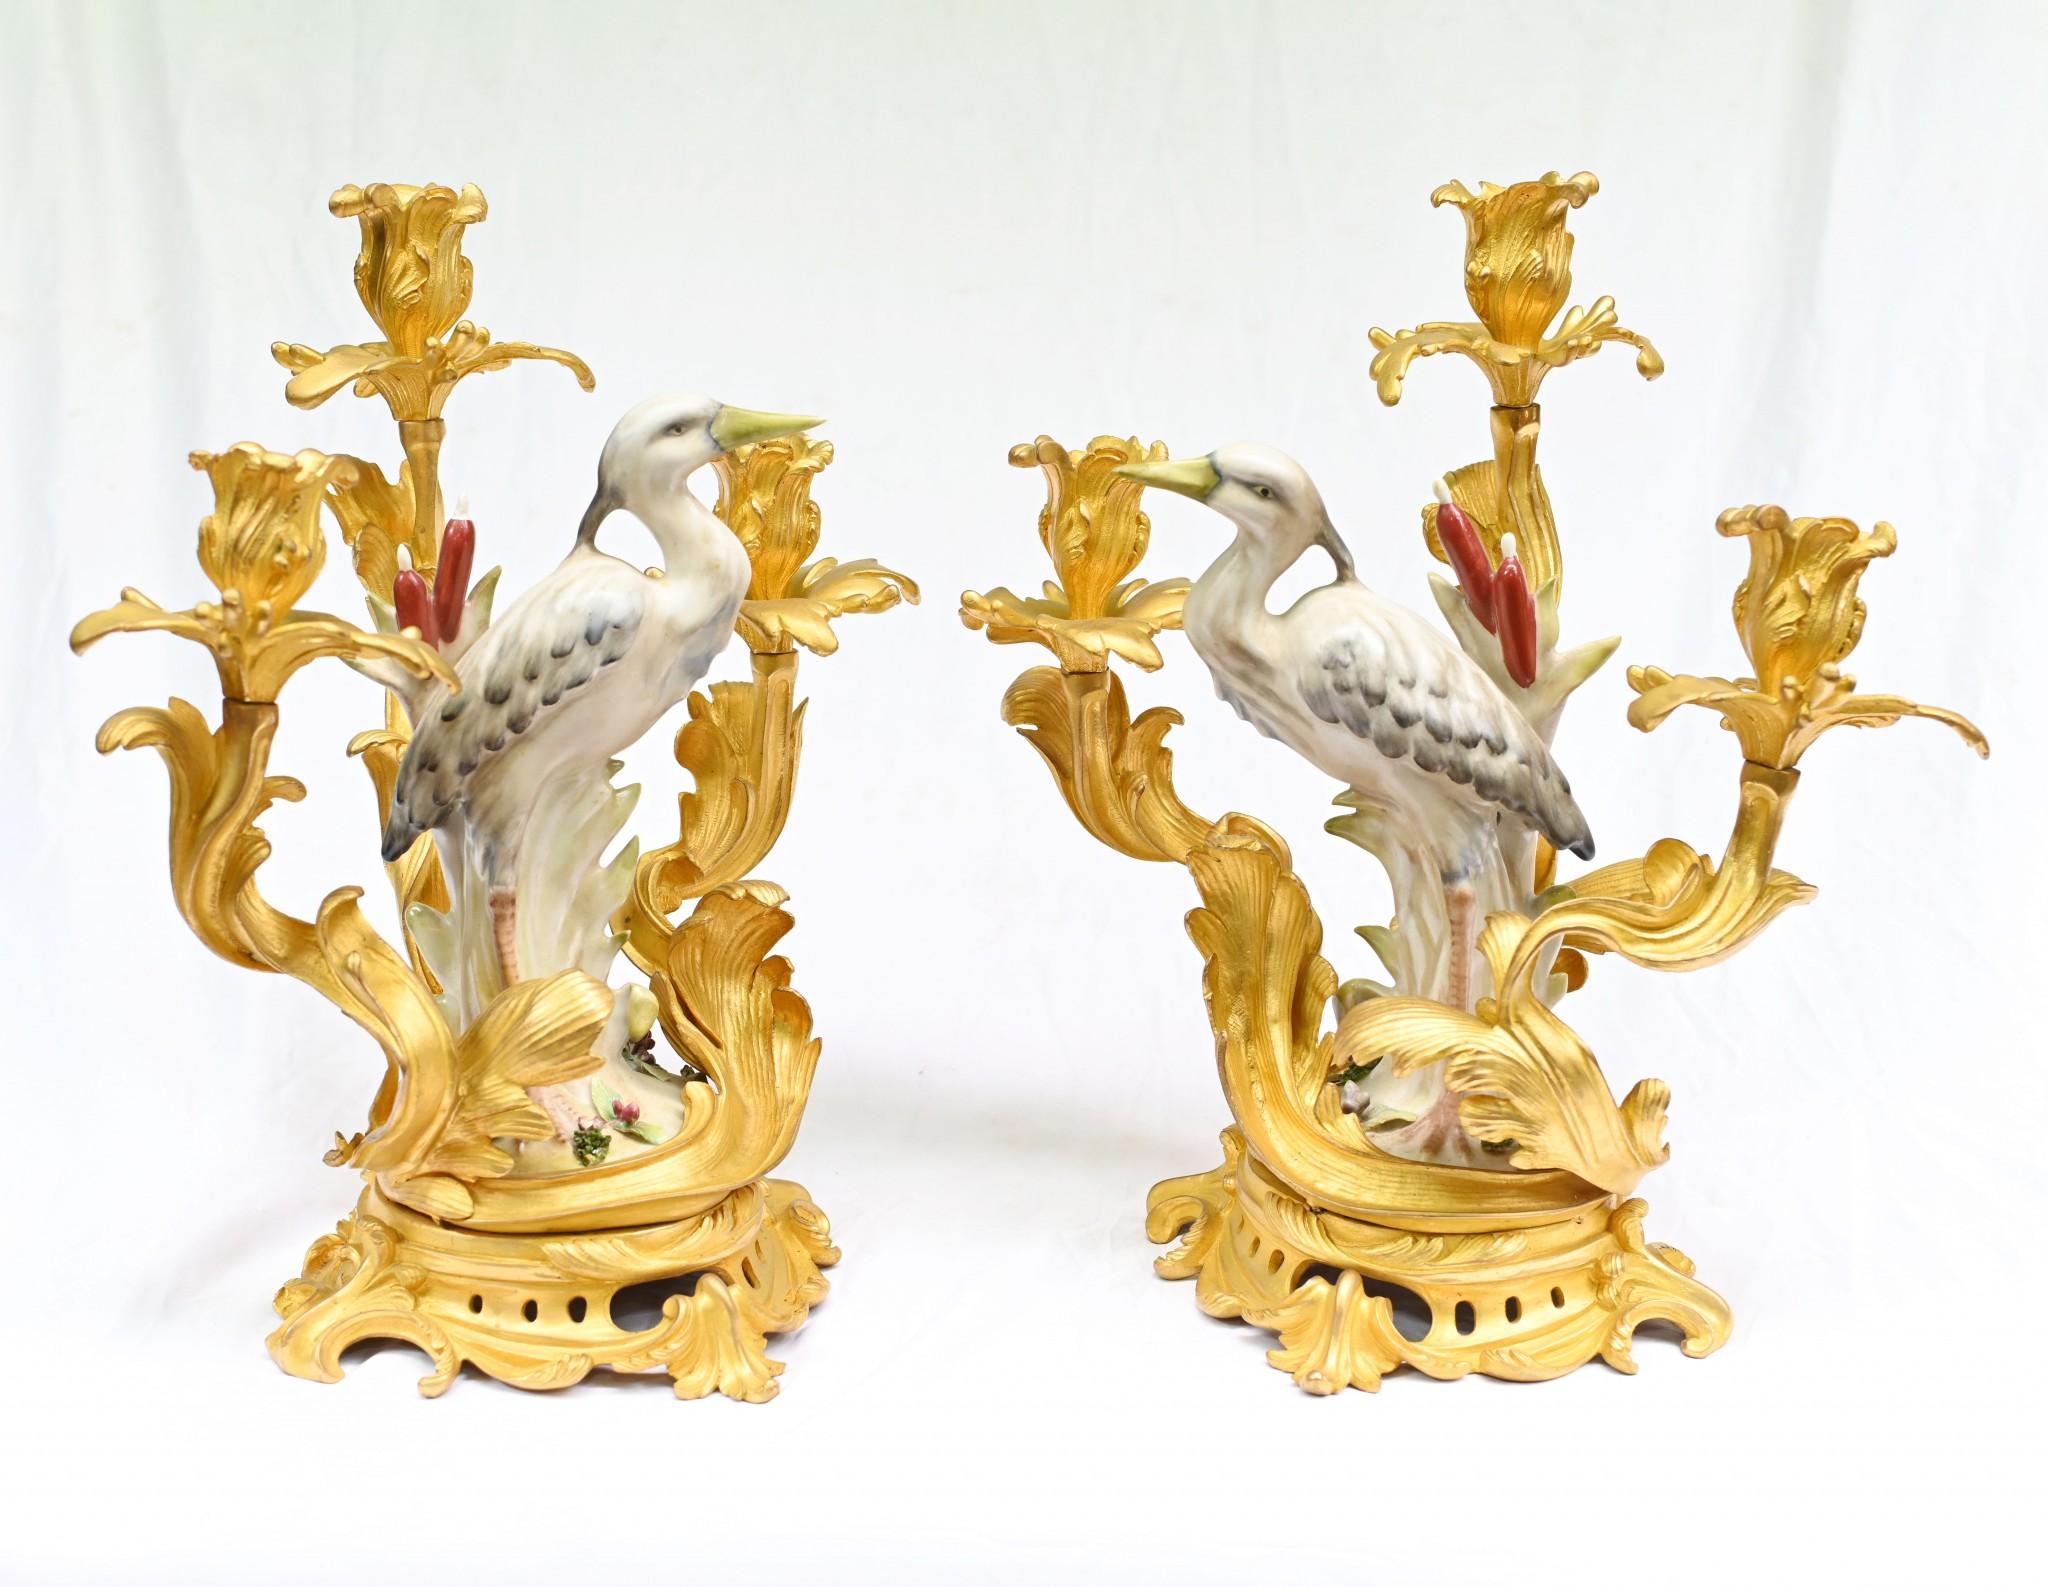 Wonderful pair of Meissen porcelain and gilt candelabras
Please see a close up of the factory stamp on the side of the birds
Very ornate pair with three branches to the gilt rococo candelabras
The bird is a type of crane or other wading bird and